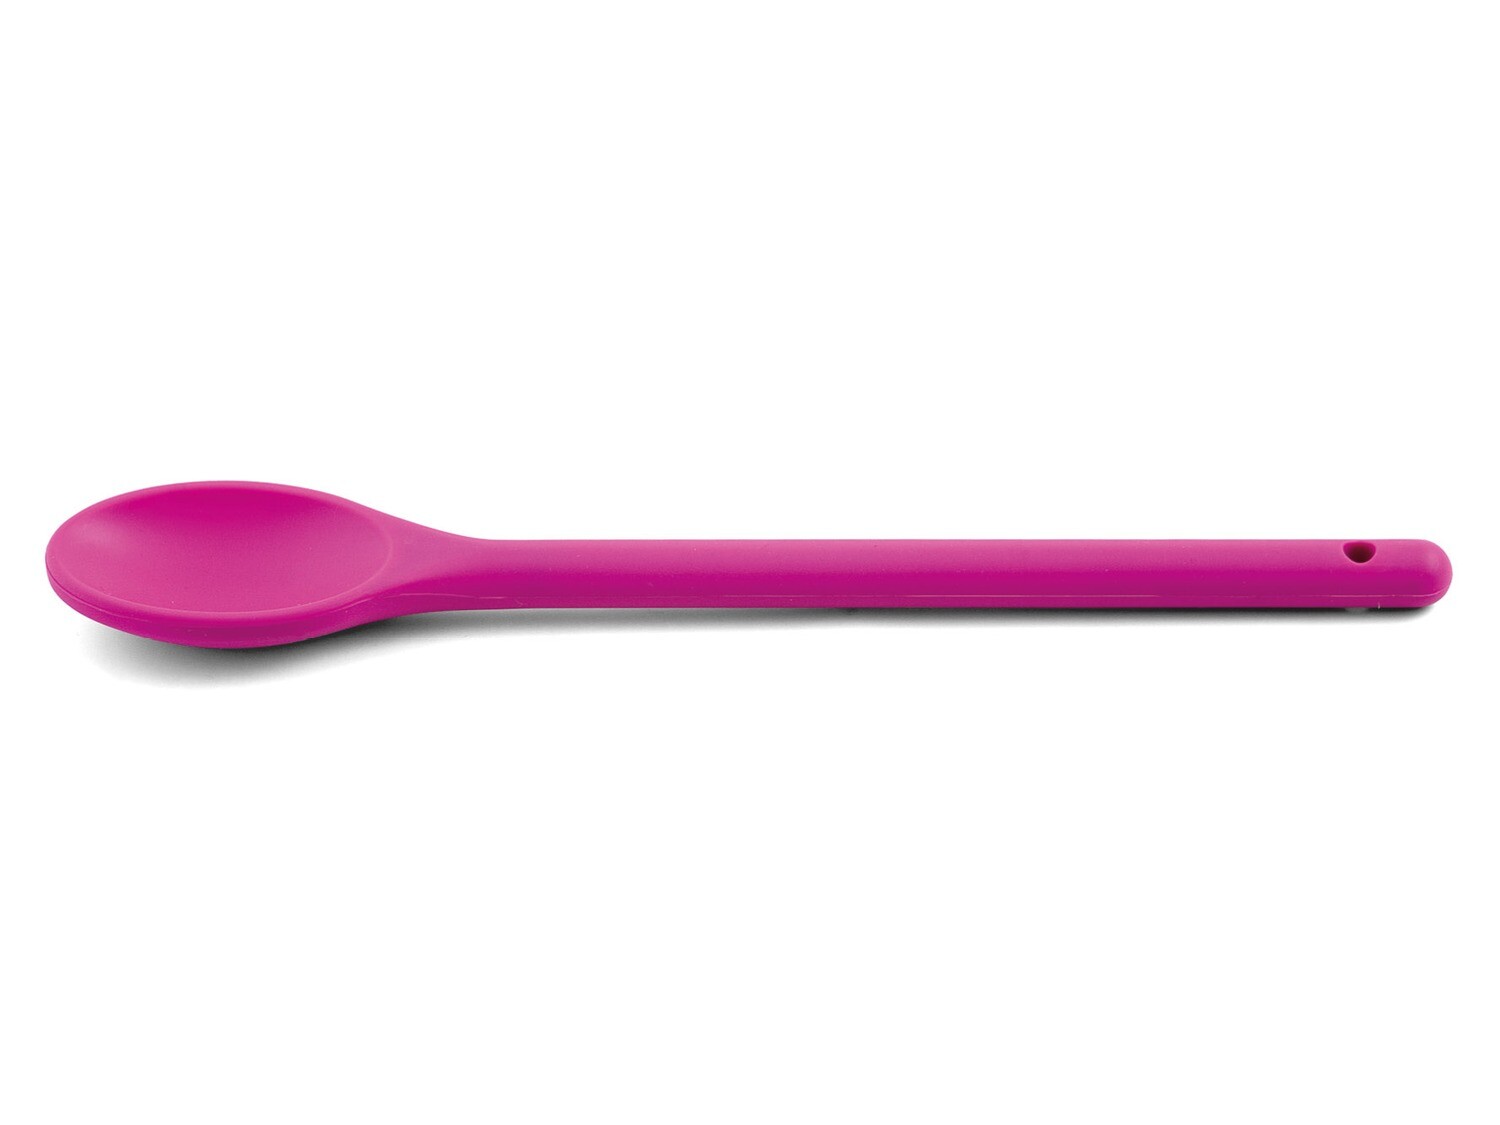 Cucchiaio in silicone 30 cm pink - Weis